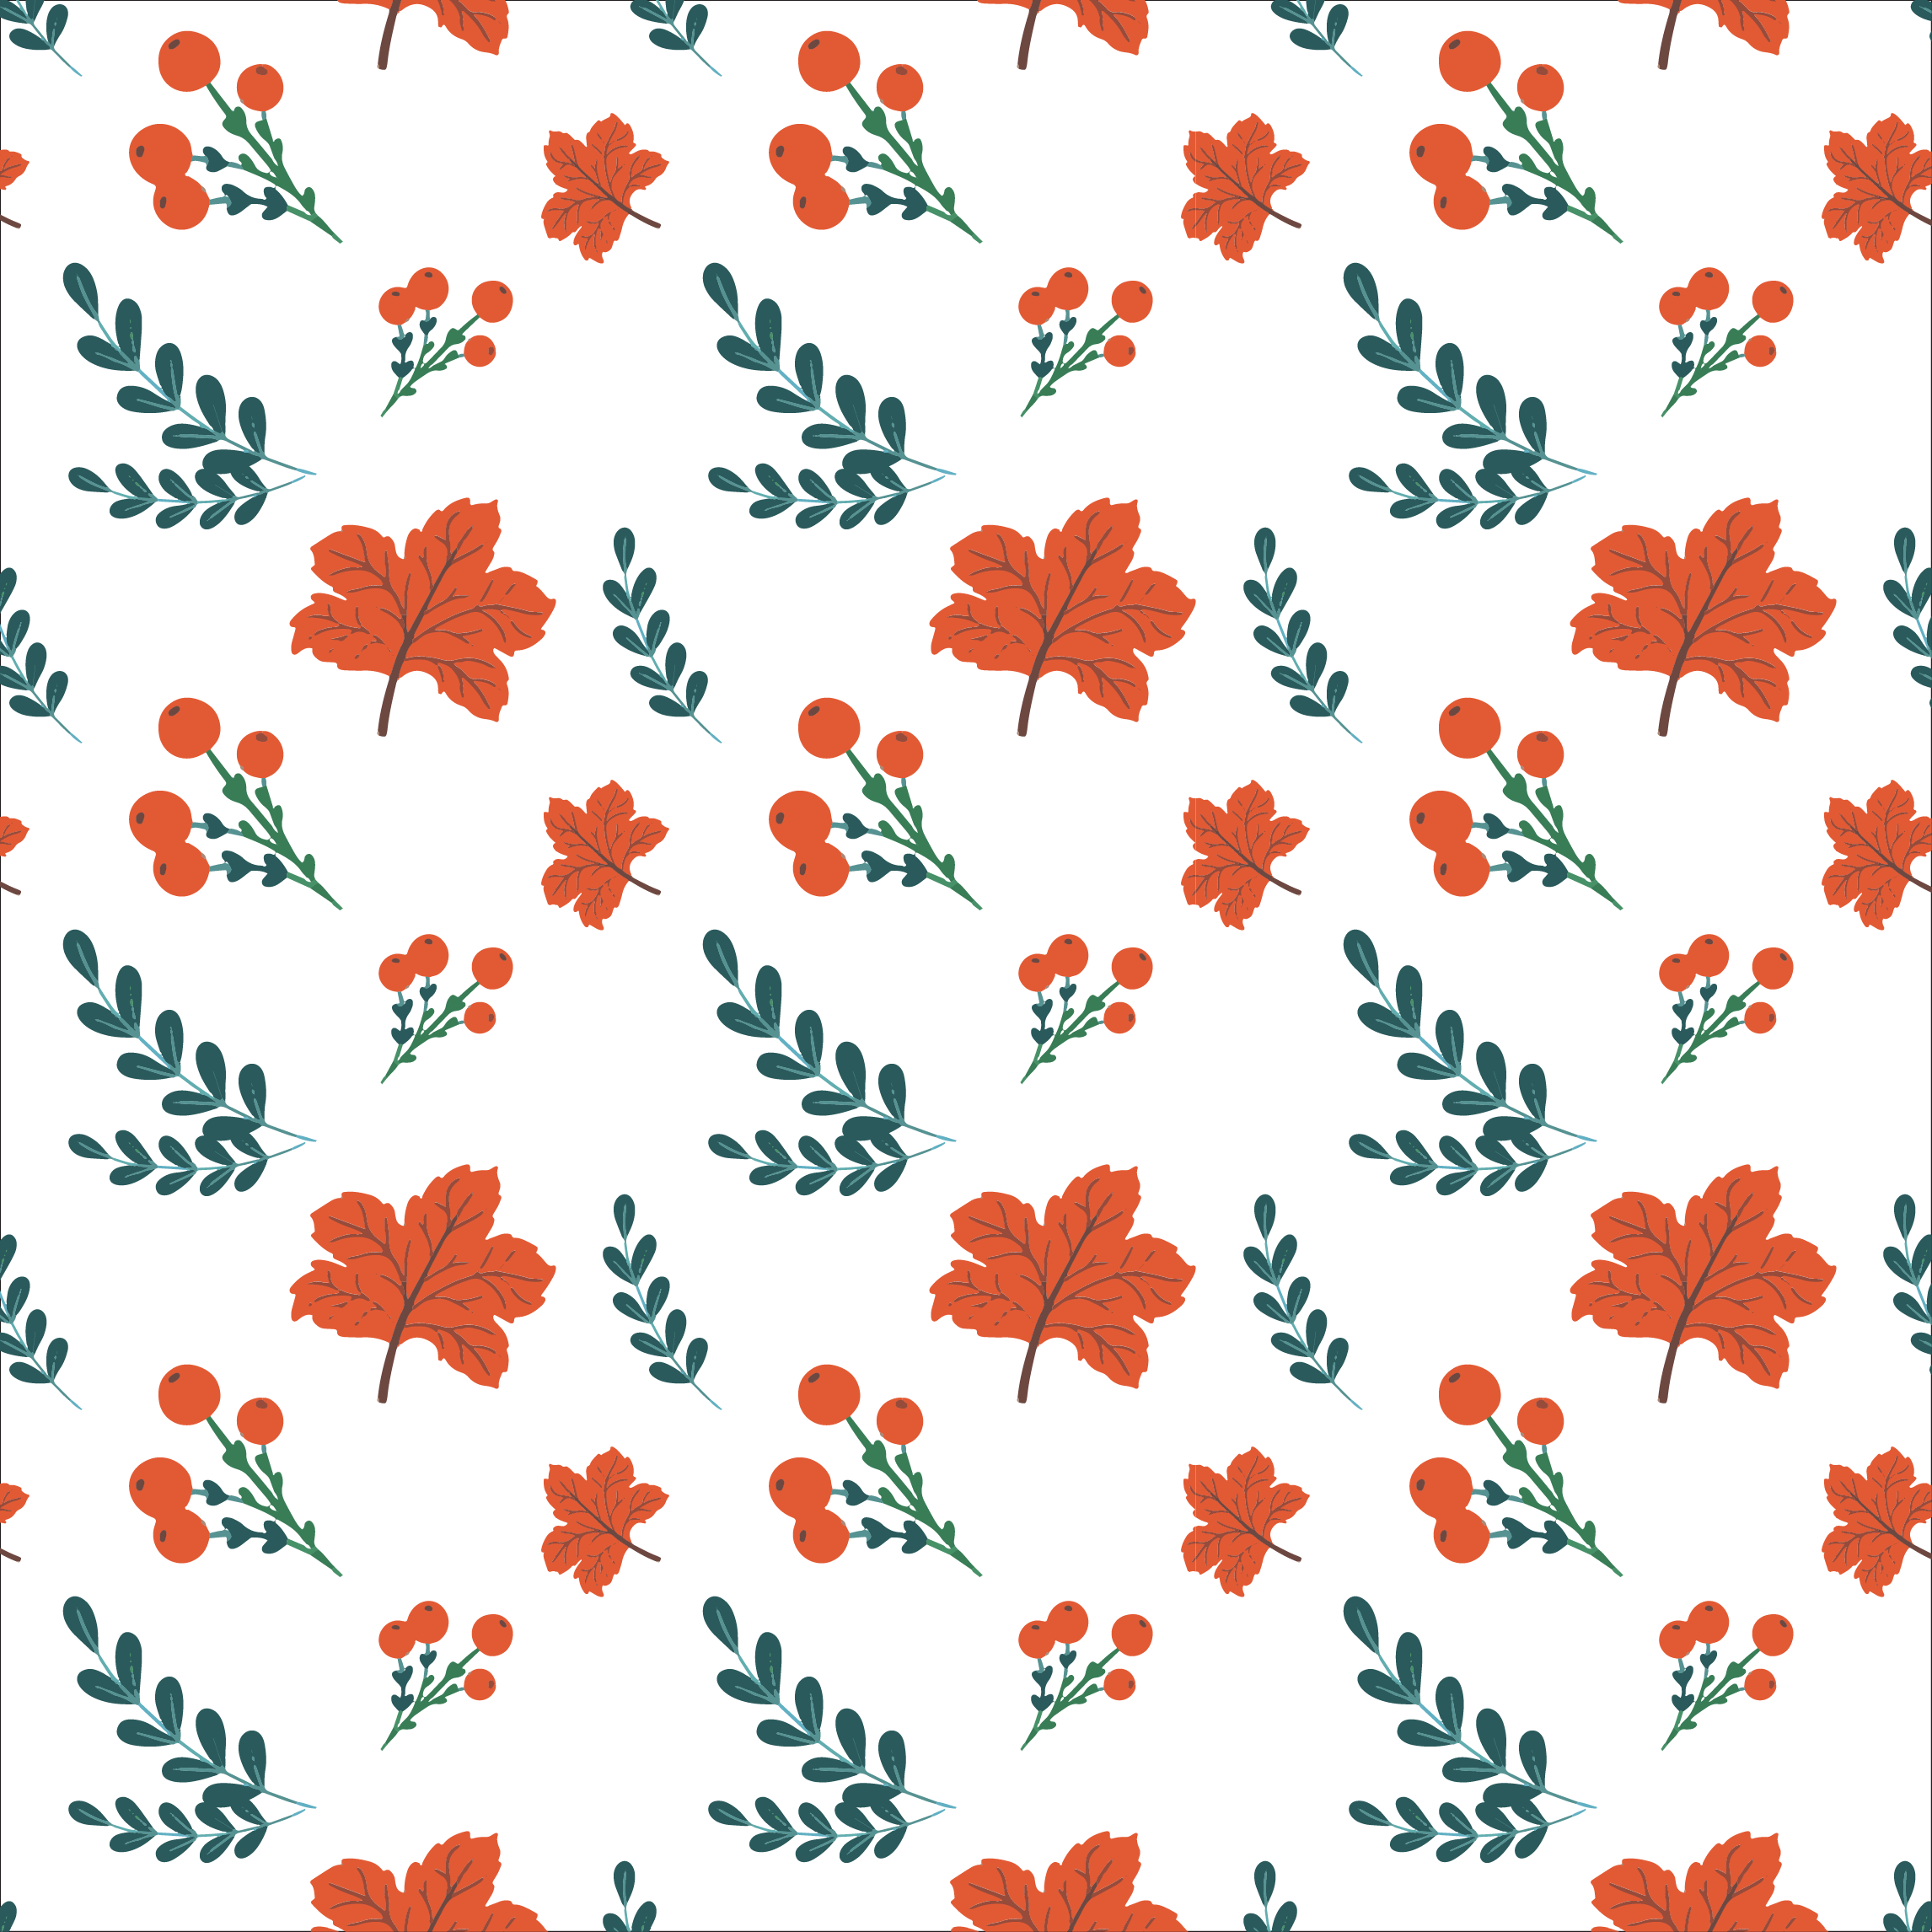 Berries and leaves pattern set preview image.